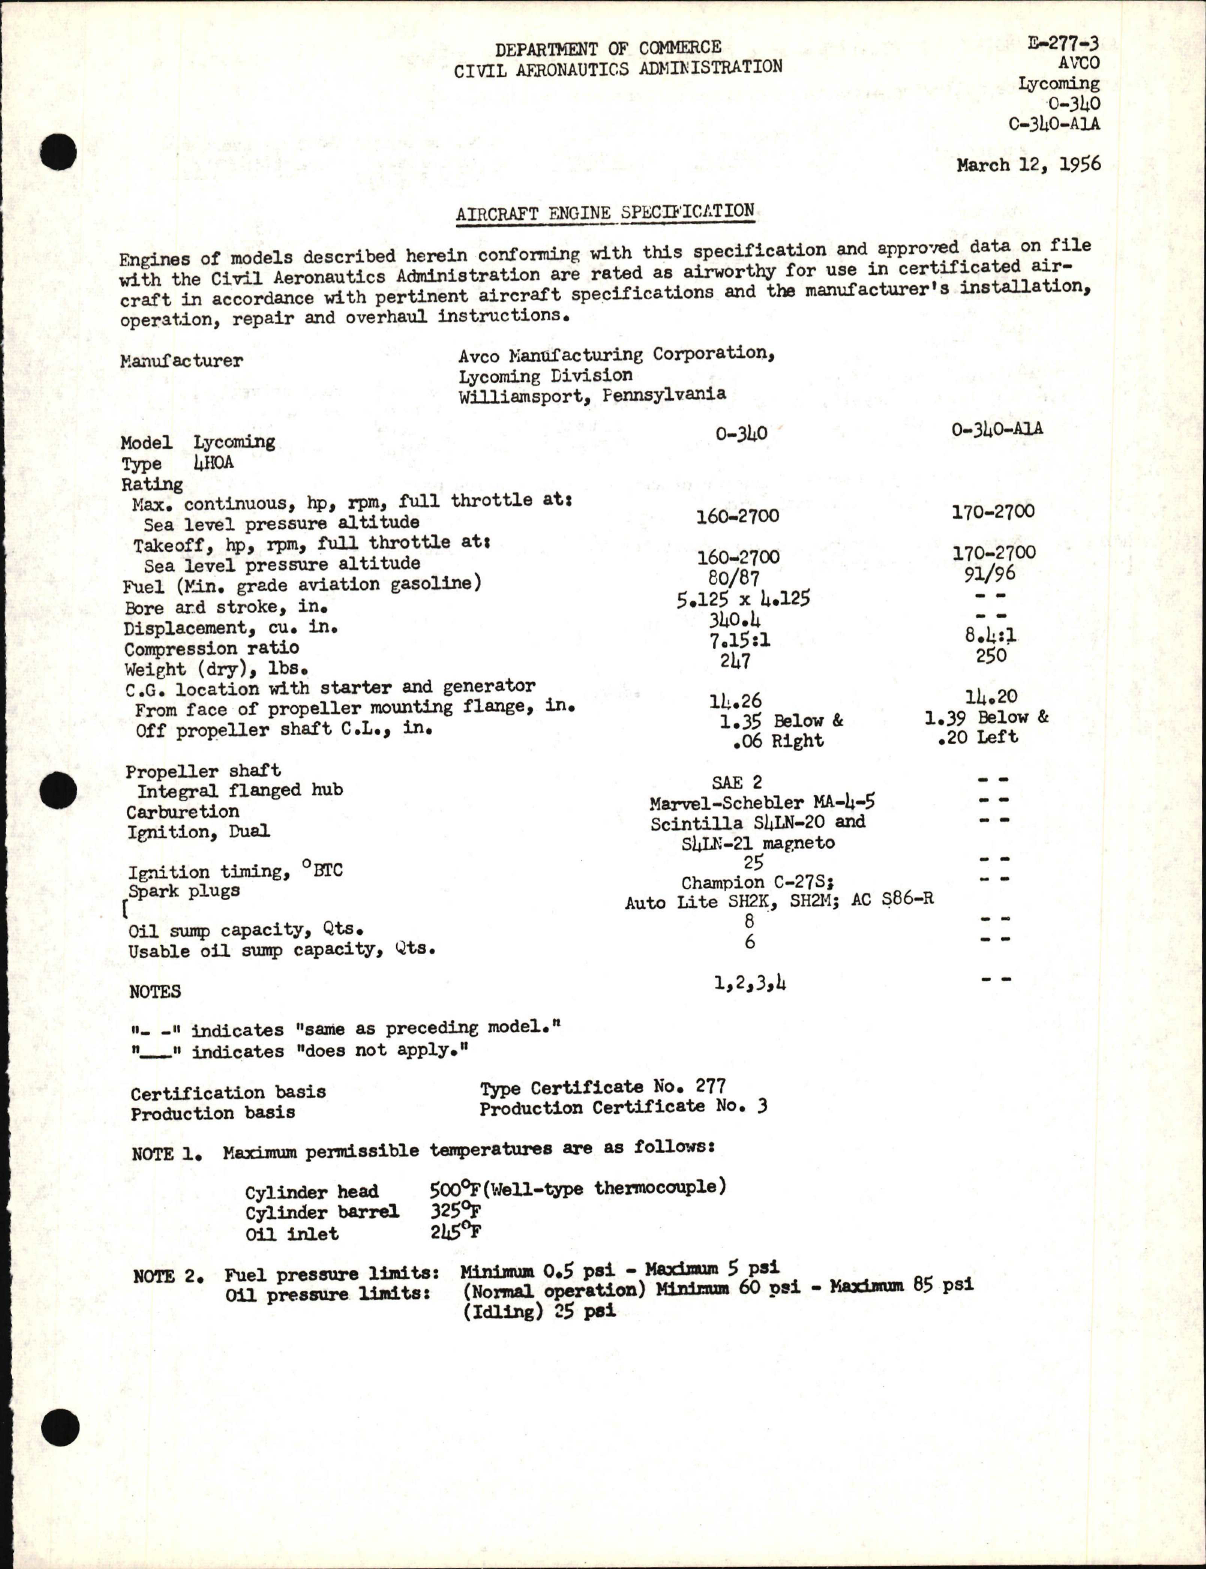 Sample page 1 from AirCorps Library document: O-340 and O-340-A1A